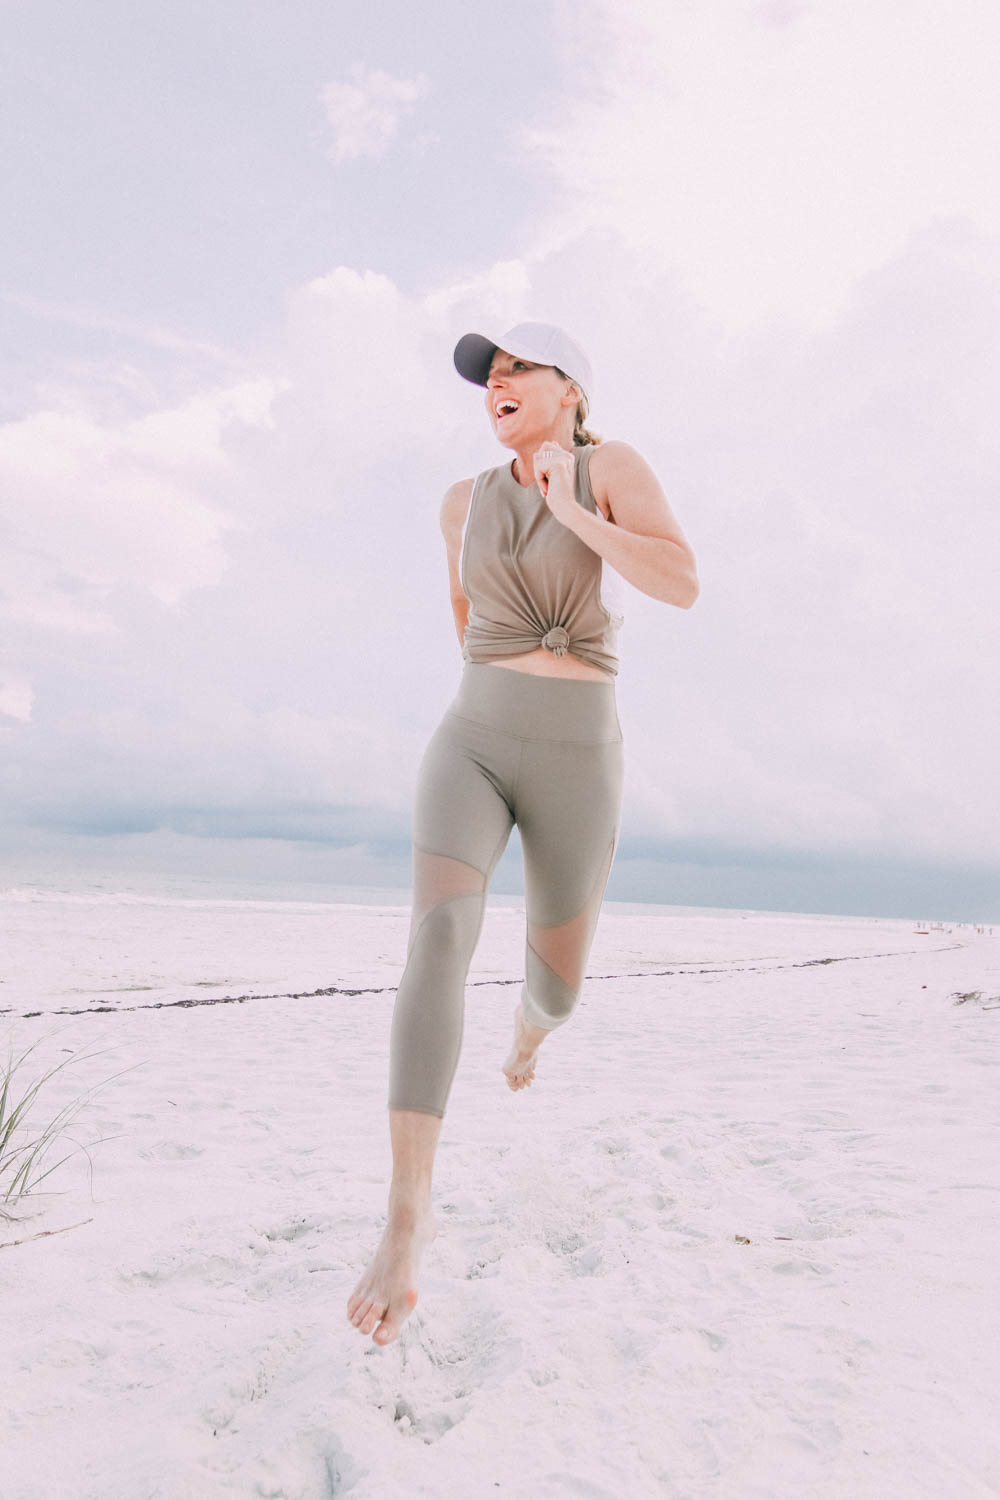 Workout Brands, affordable activewear for women, Fashion blogger Erin Busbee of BusbeeStyle.com wearing tan leggings and tank by Alo Yoga on the beach in Florida